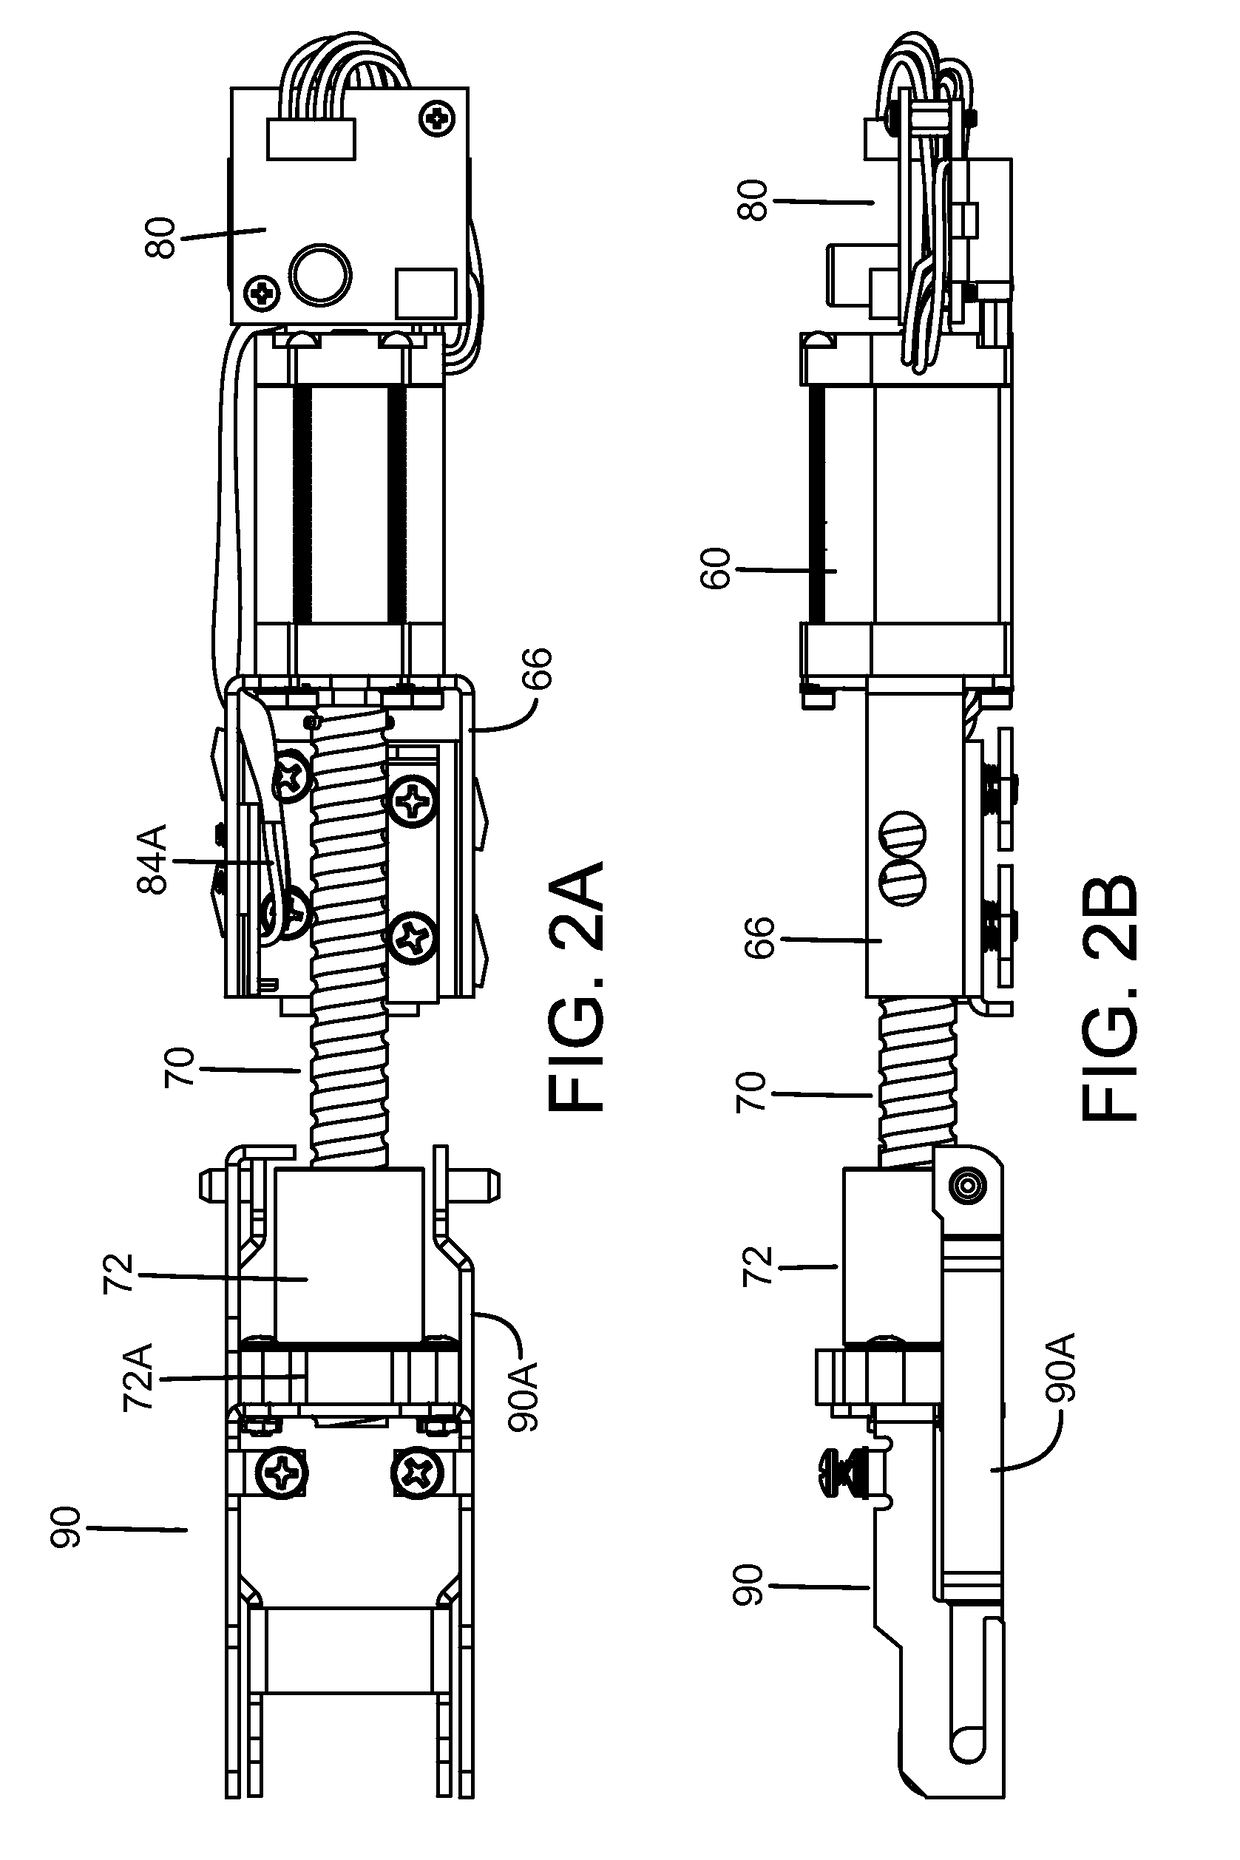 Actuator with ball screw drive